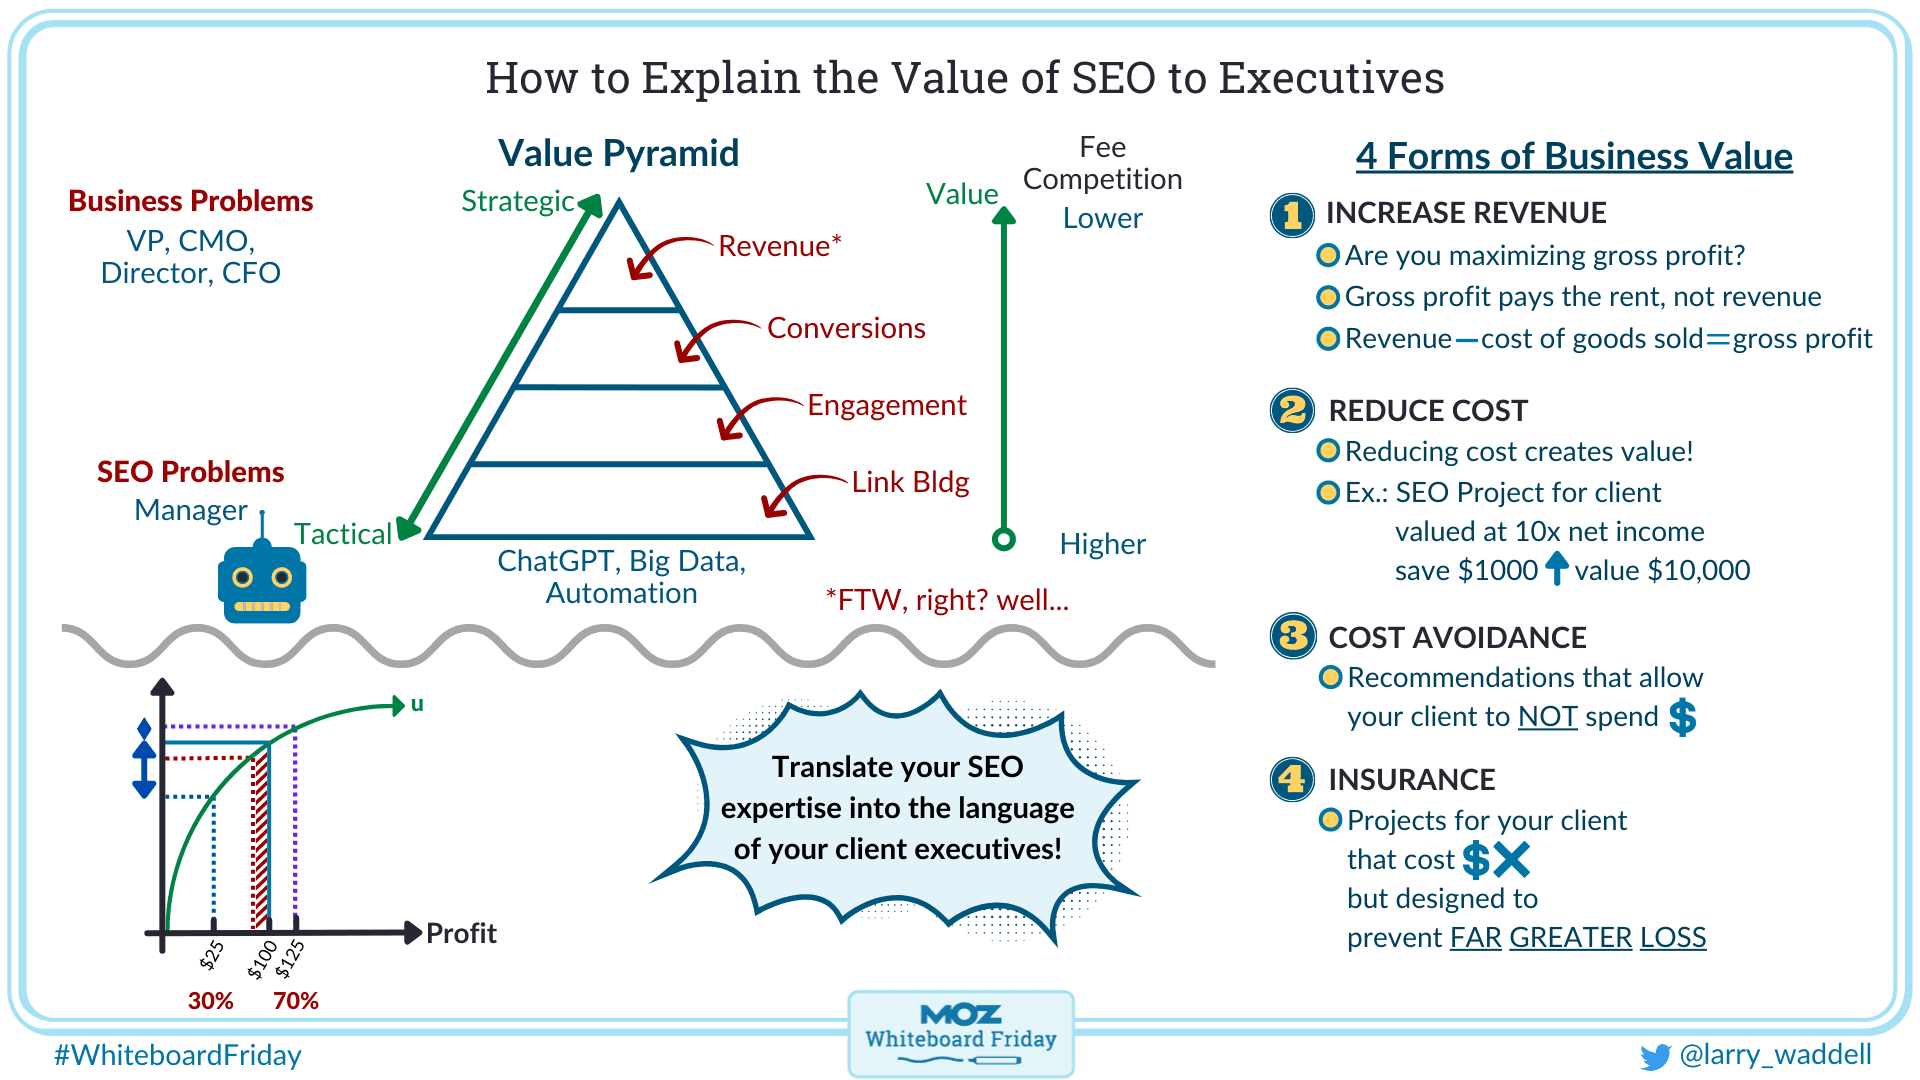 how-to-explain-the-value-of-seo-to-executives-whiteboard-friday